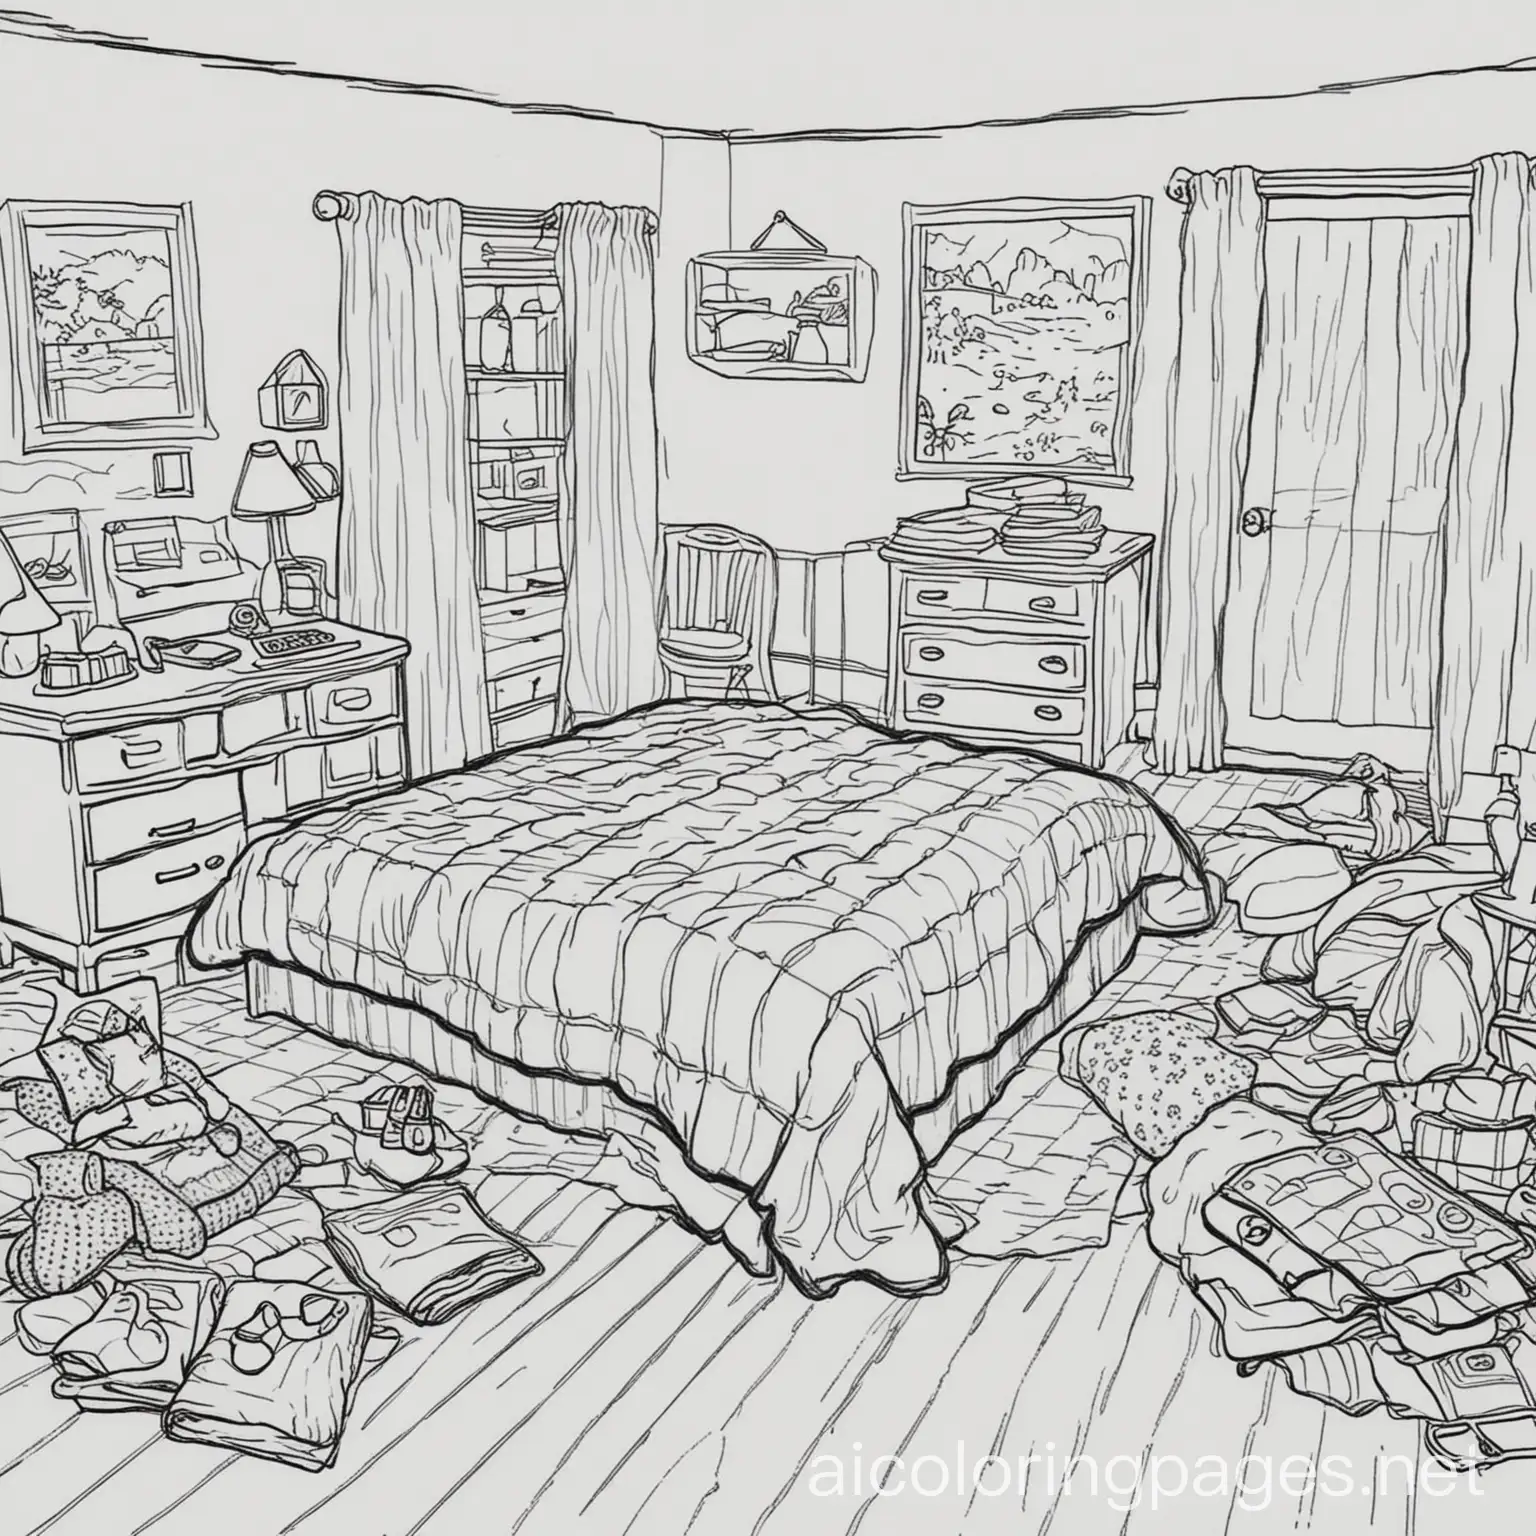 Messy-Bedroom-Coloring-Page-Clothes-on-the-Floor-in-Black-and-White